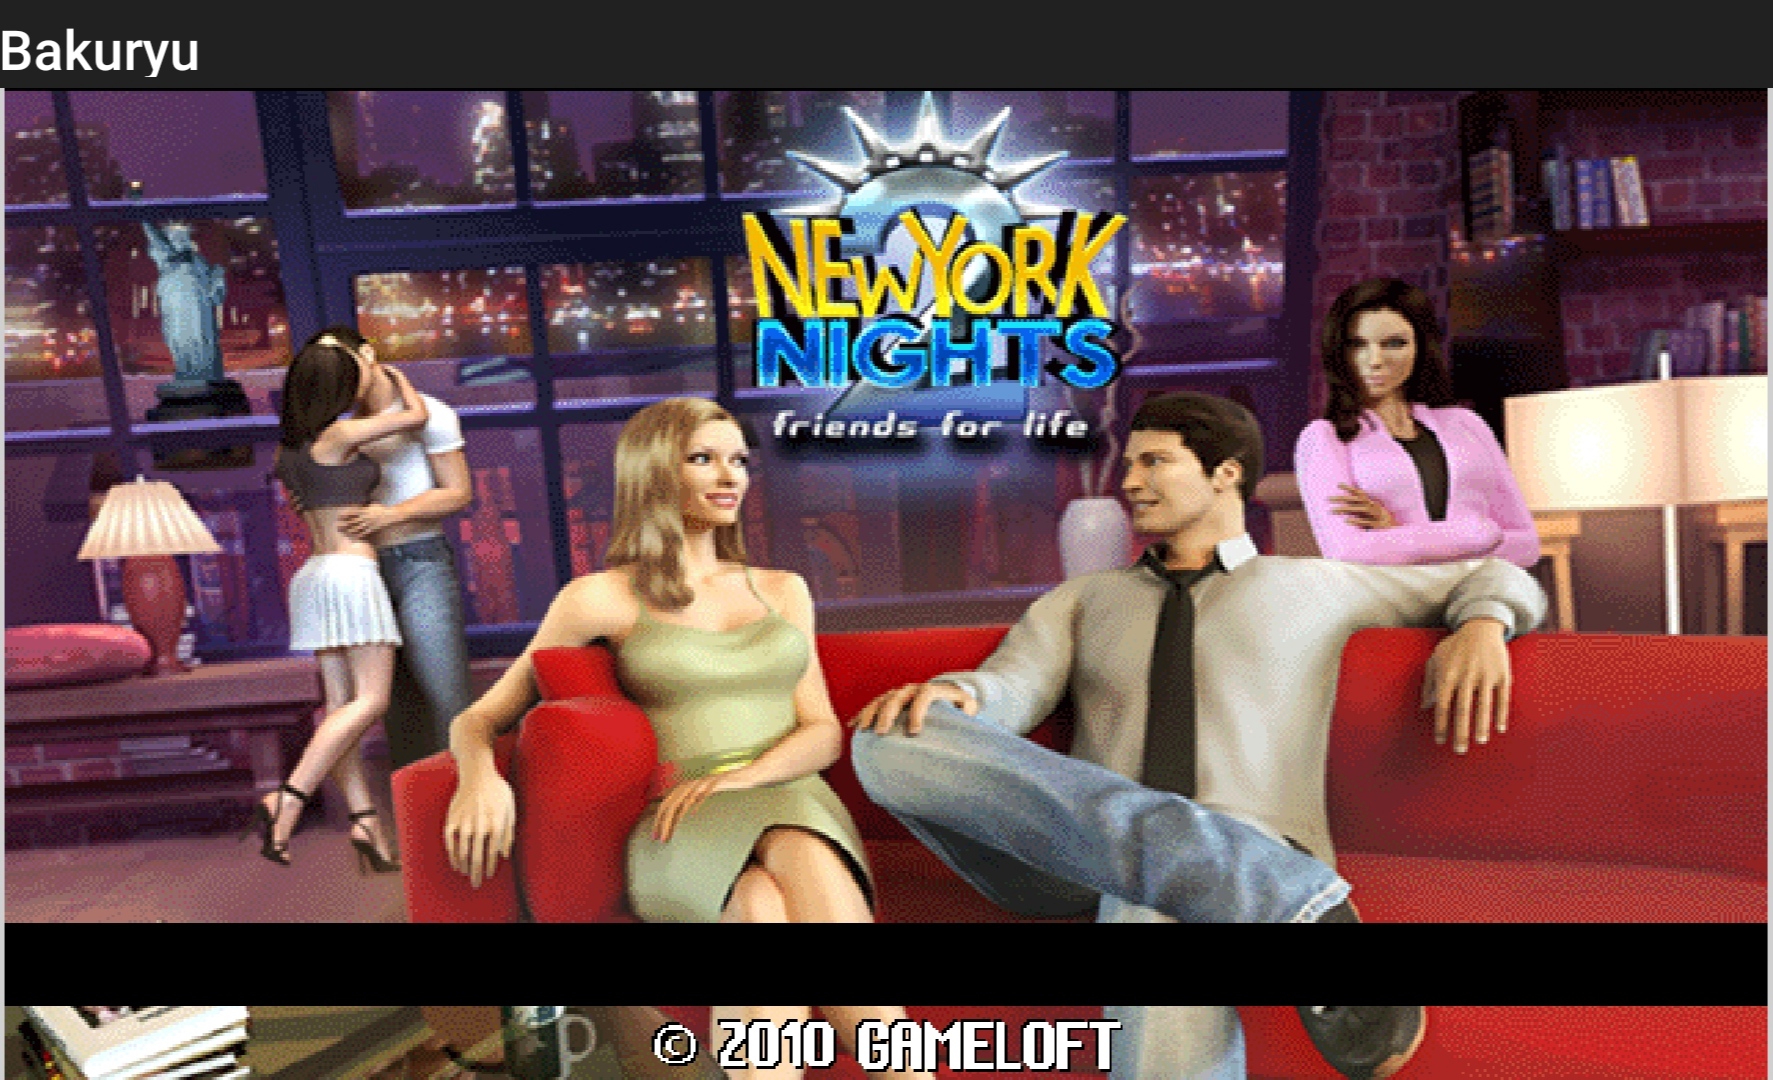 [SP Hack] New York Nights 2: Friends for Life Hack Full 999999999$